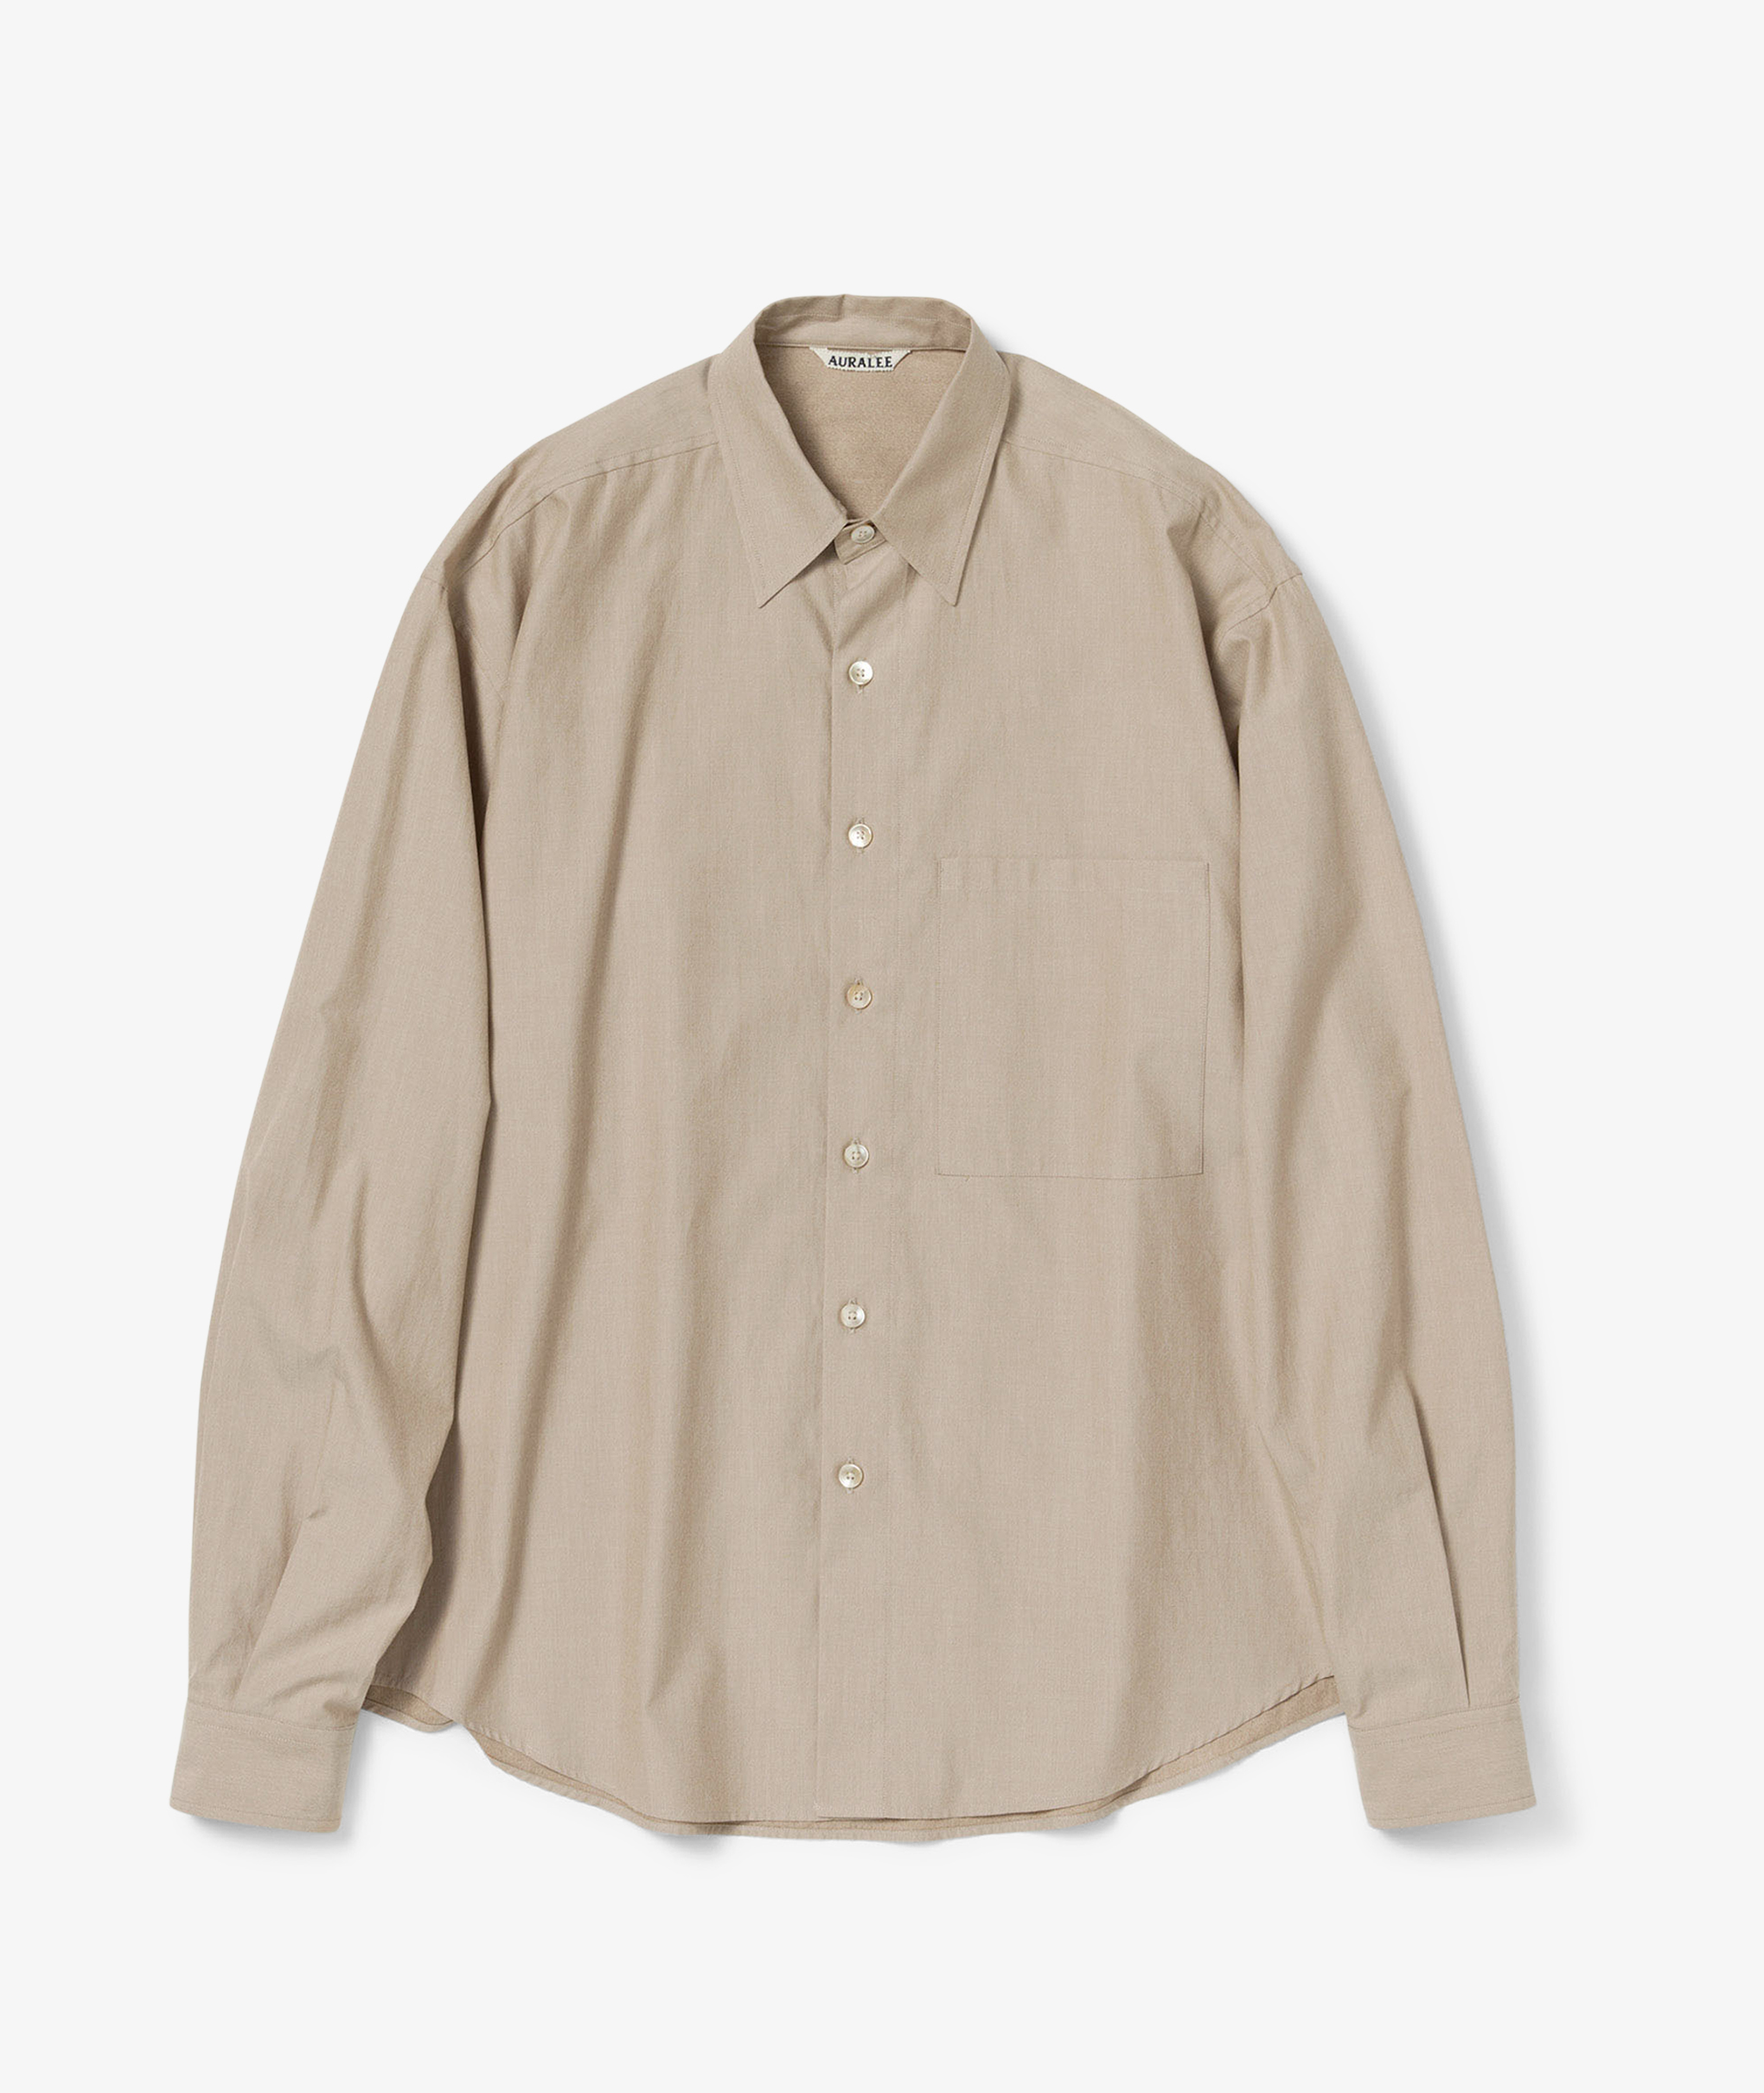 AURALEE 23AW WASHED FINX TWILL SHIRT - トップス